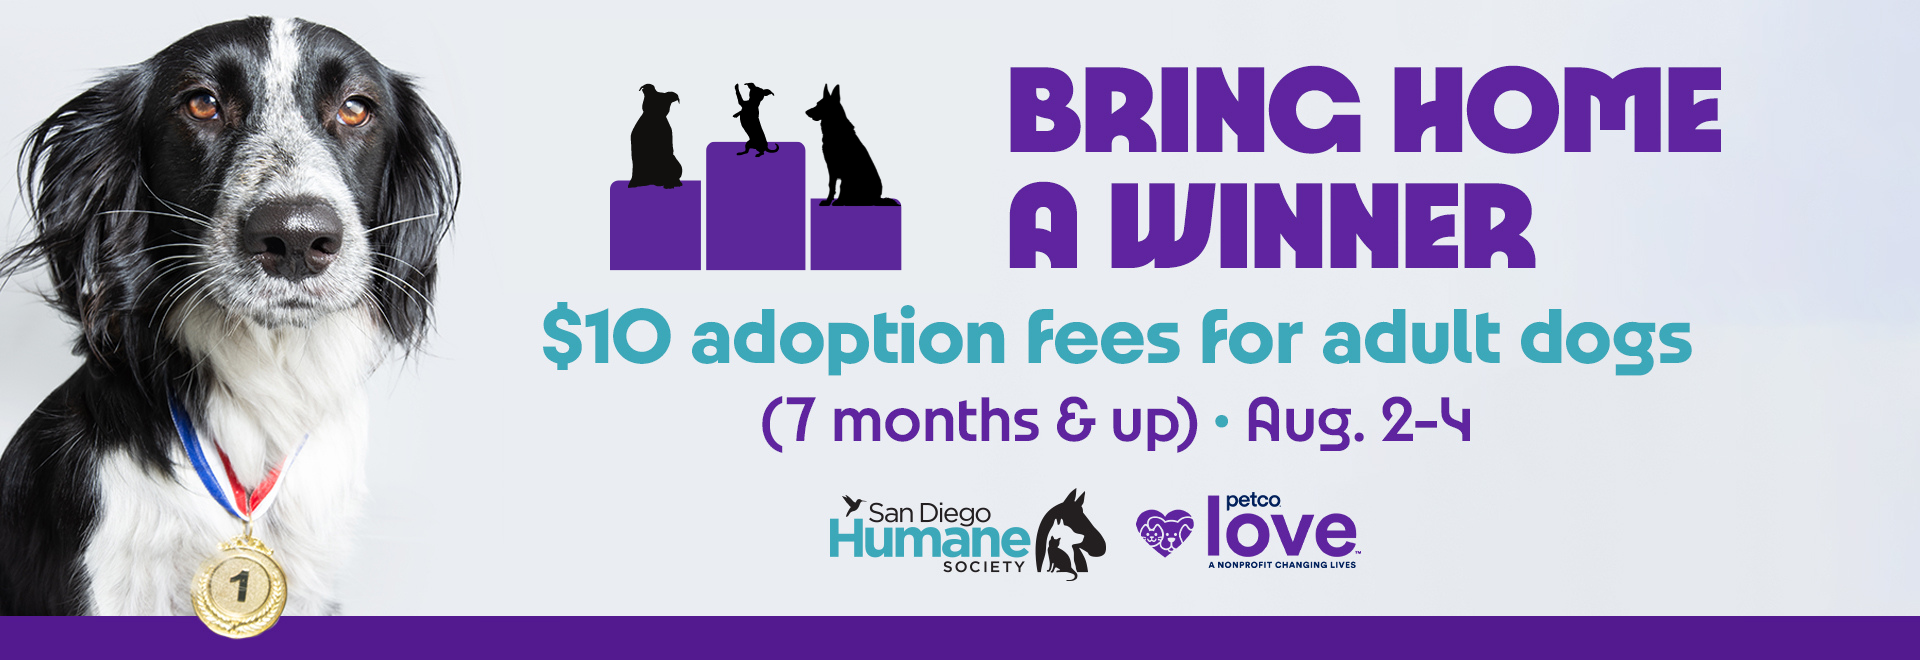 Bring home a winner | $10 Adoption fees for adult dogs (7 months & up) Aug. 2 - 4